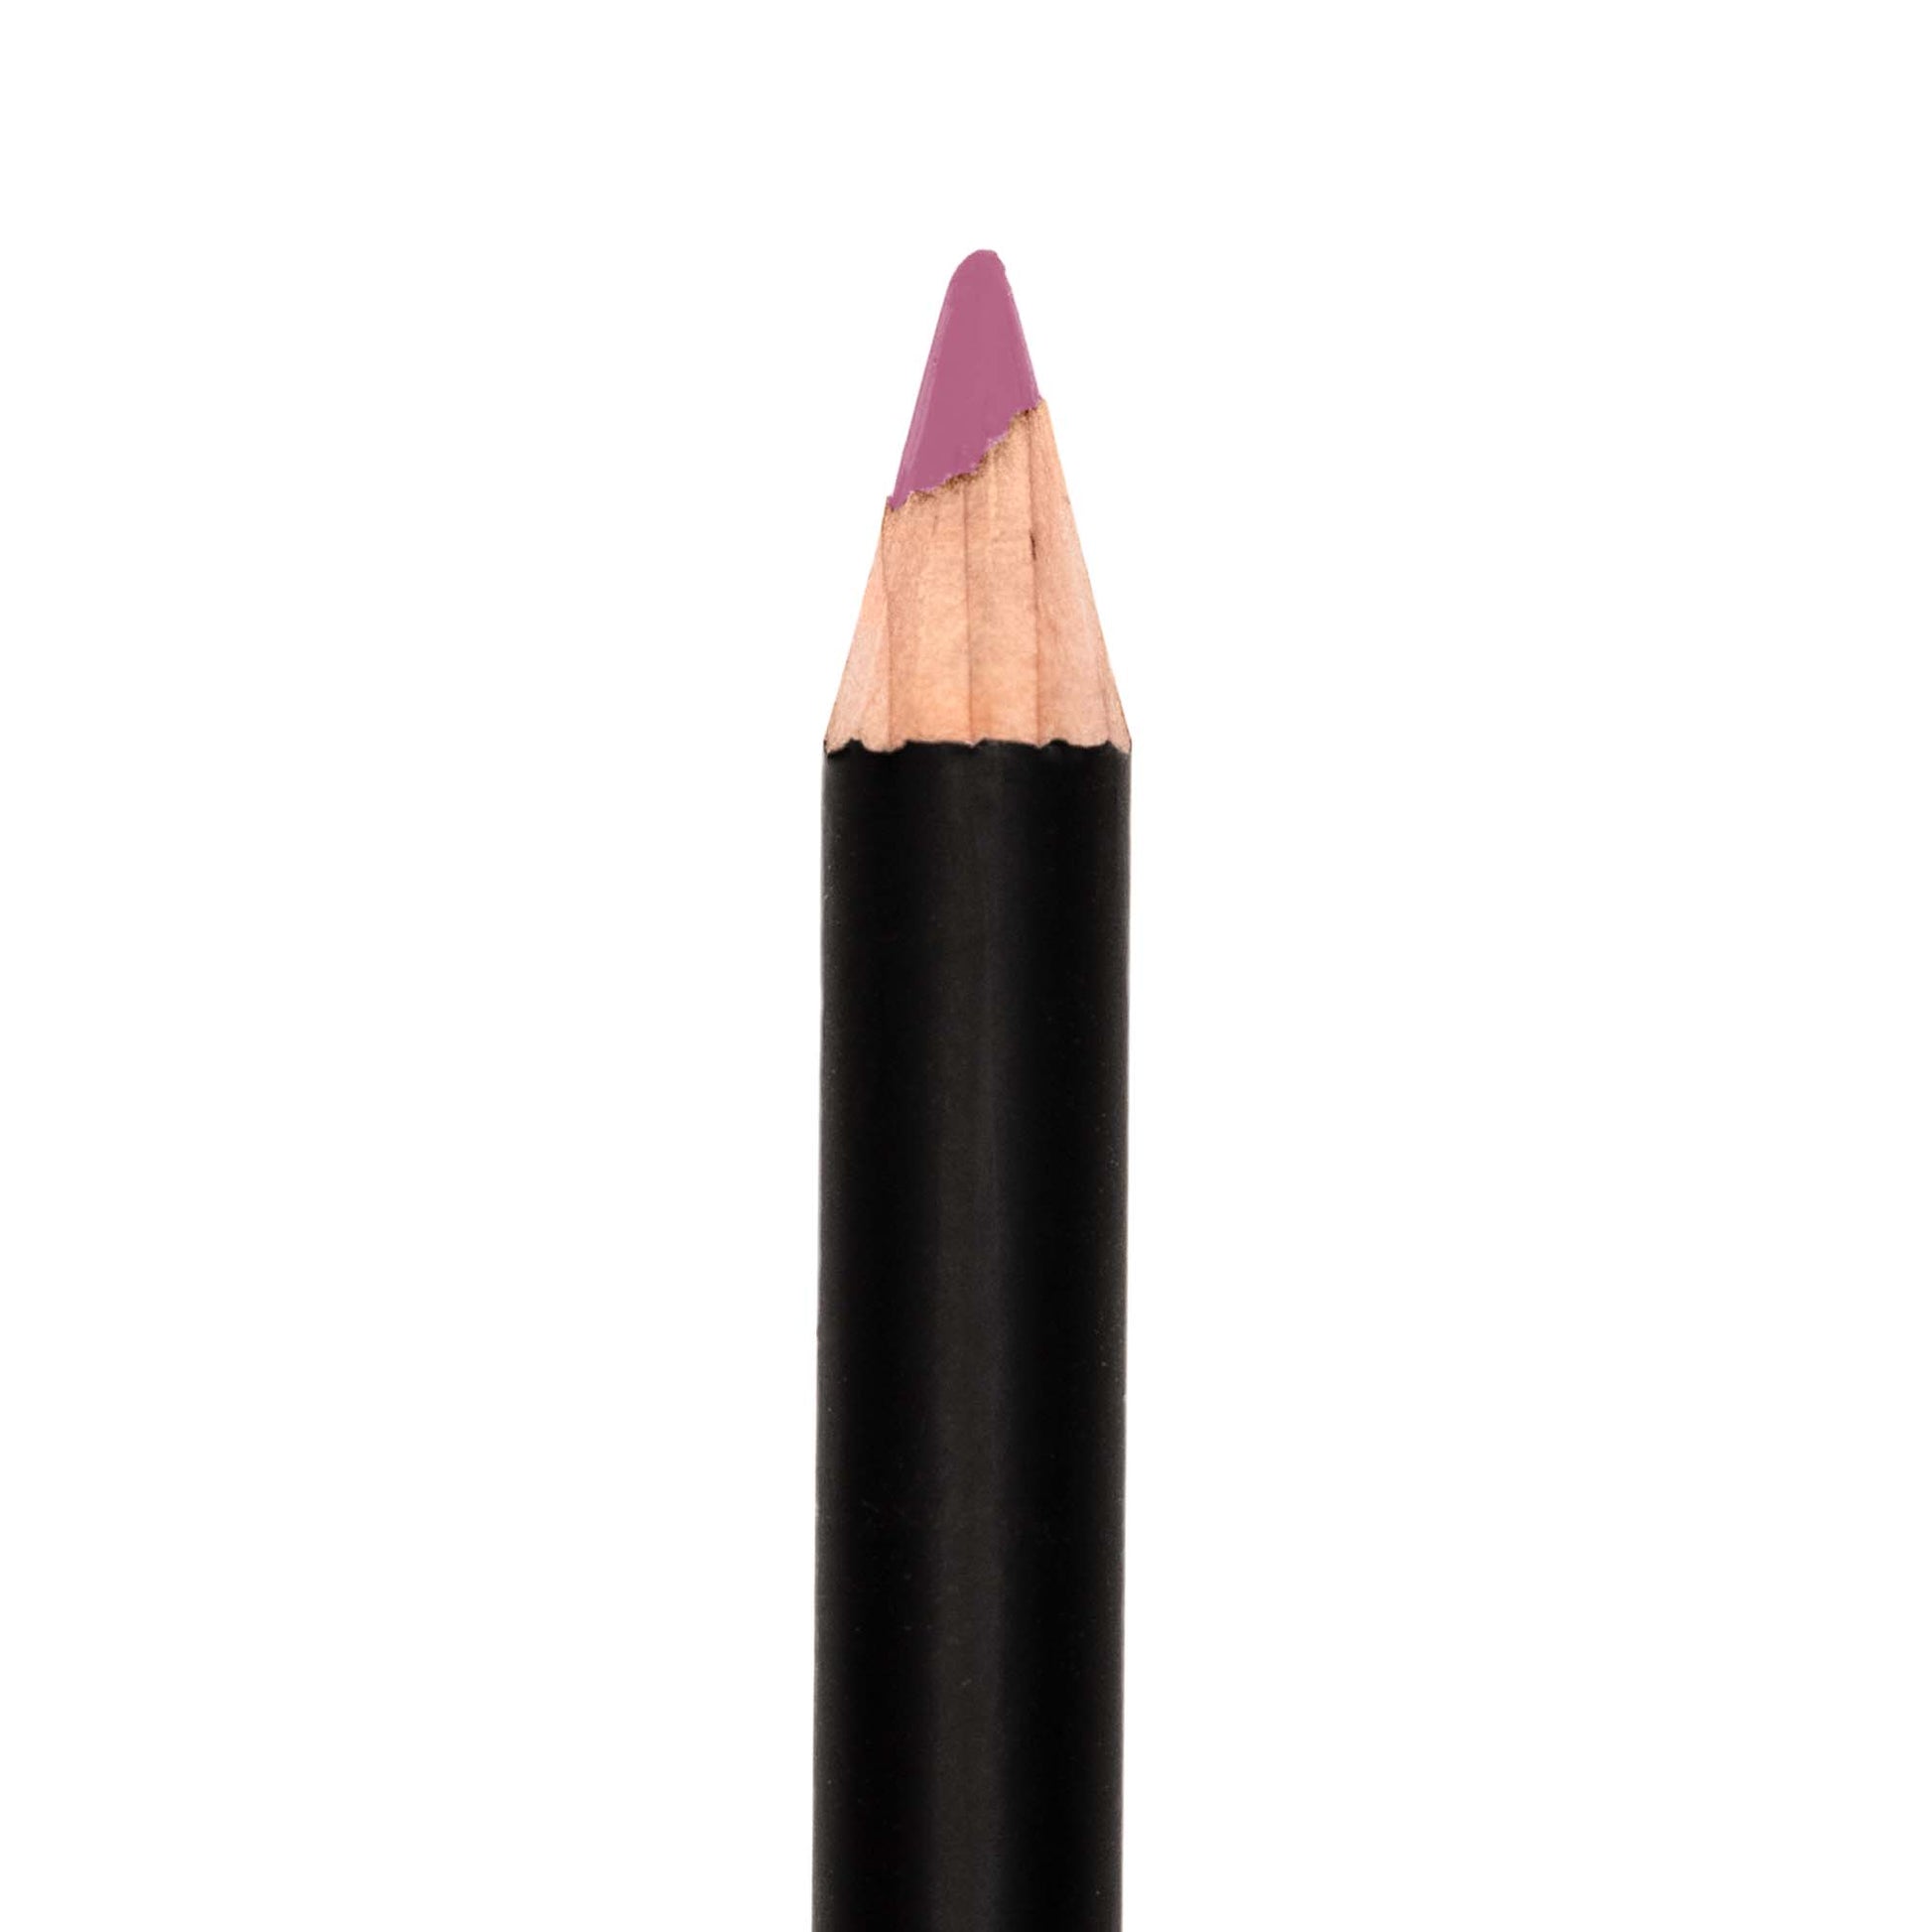 Experience the ultimate pout with Cruisin Organics' Blasted Brick Lip Pencil! With a smooth texture and shea butter infusion, this long-lasting, smudge-free formula delivers bold, rich pigment to enhance your favorite lipstick.